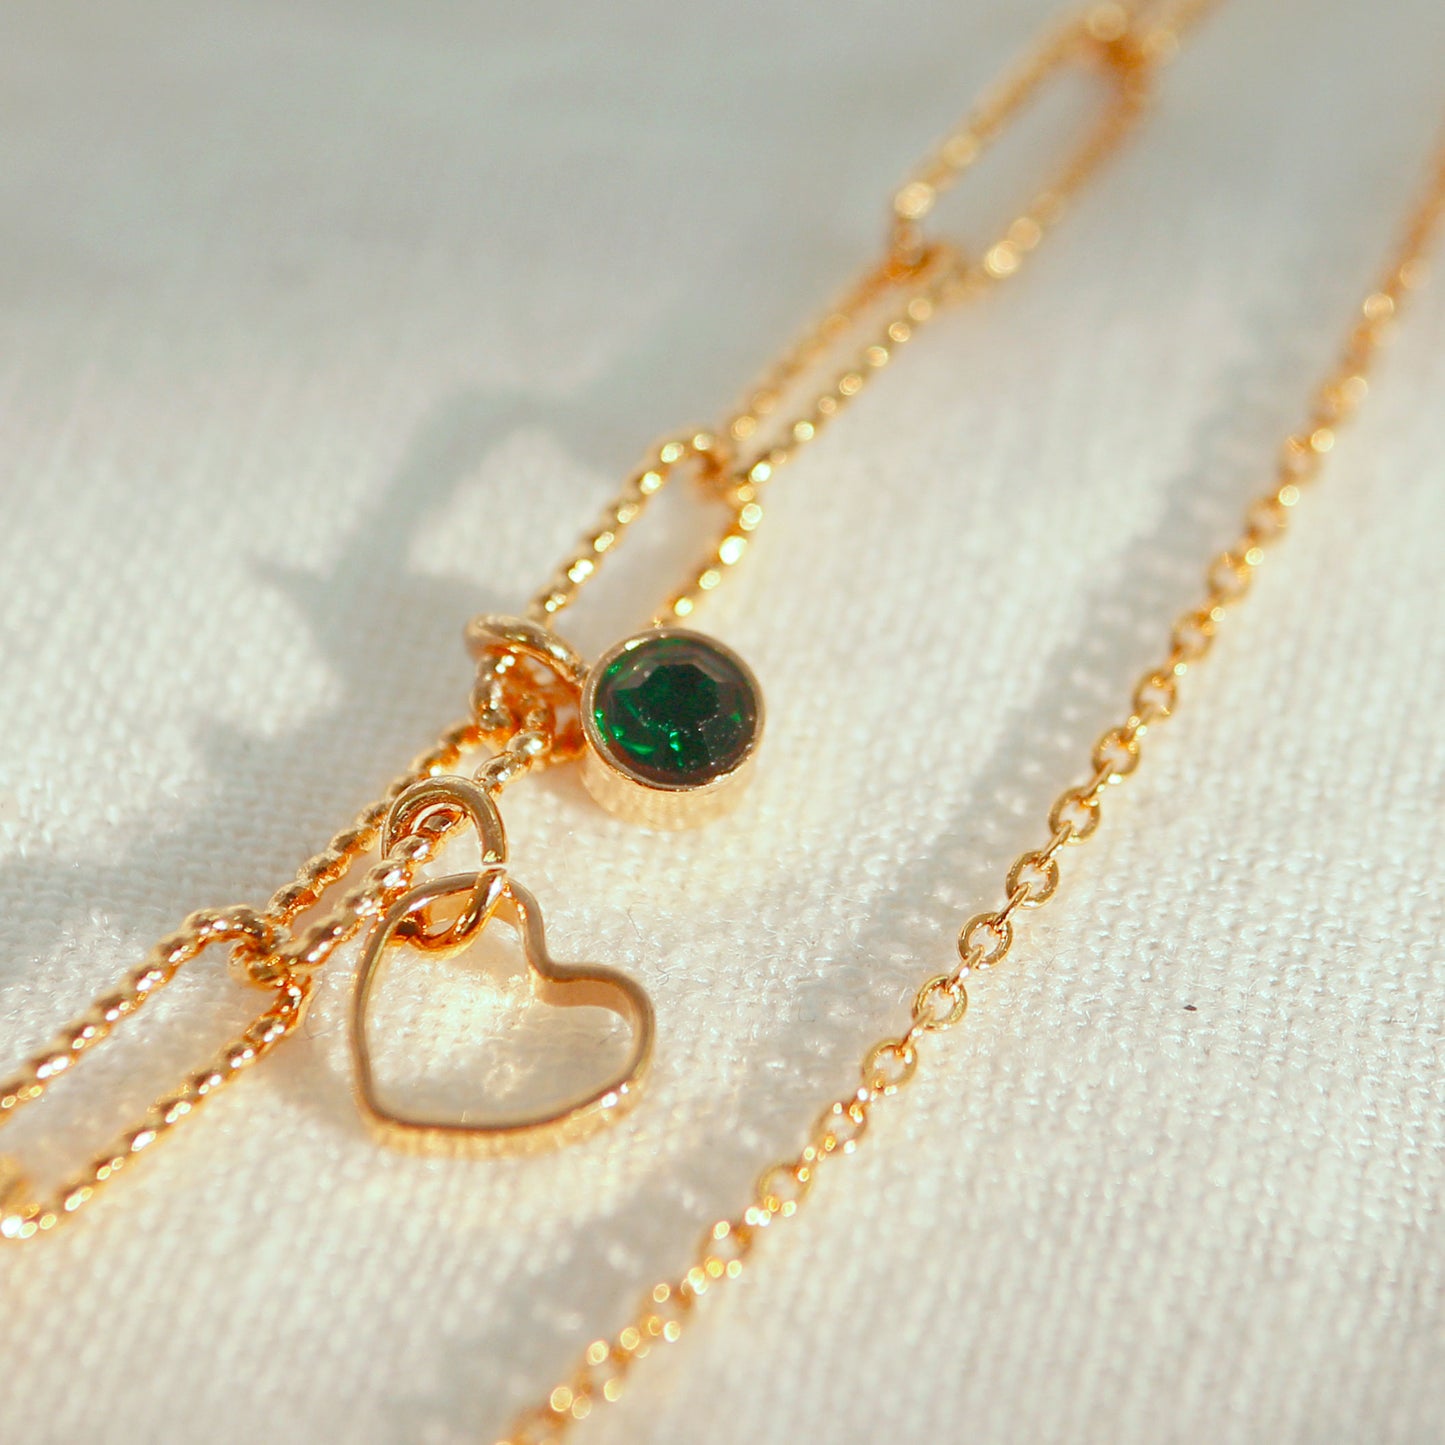 Heart Birthstone anklet shiny layered chain anklets best gift for her trendy anklets birthday gift